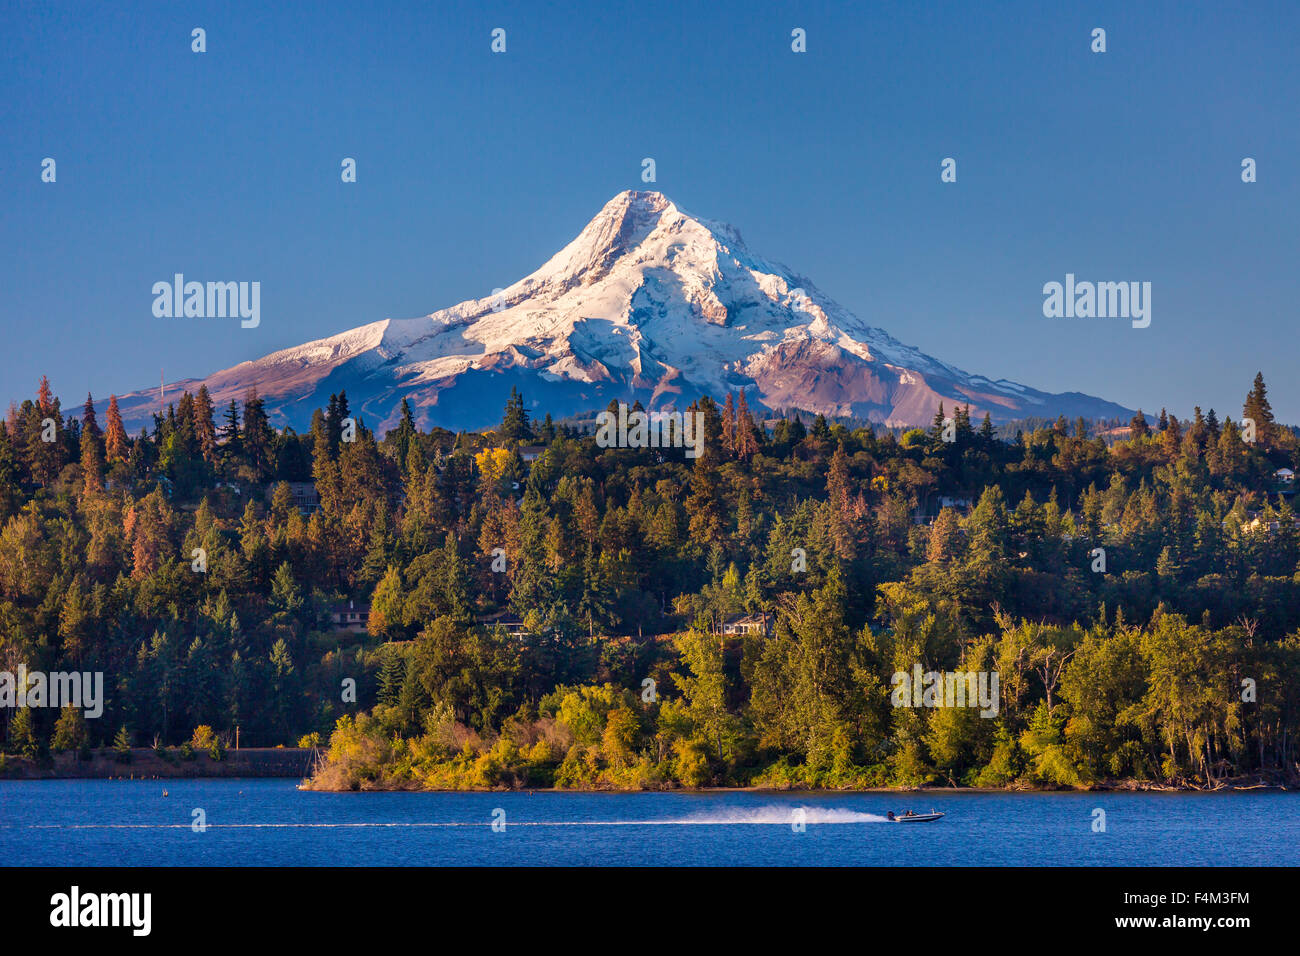 HOOD RIVER, OREGON, USA - Mount Hood, 11,241 ft (3,429 m) glaciated mountain in Cascade Range, and boat on the Columbia River. Stock Photo